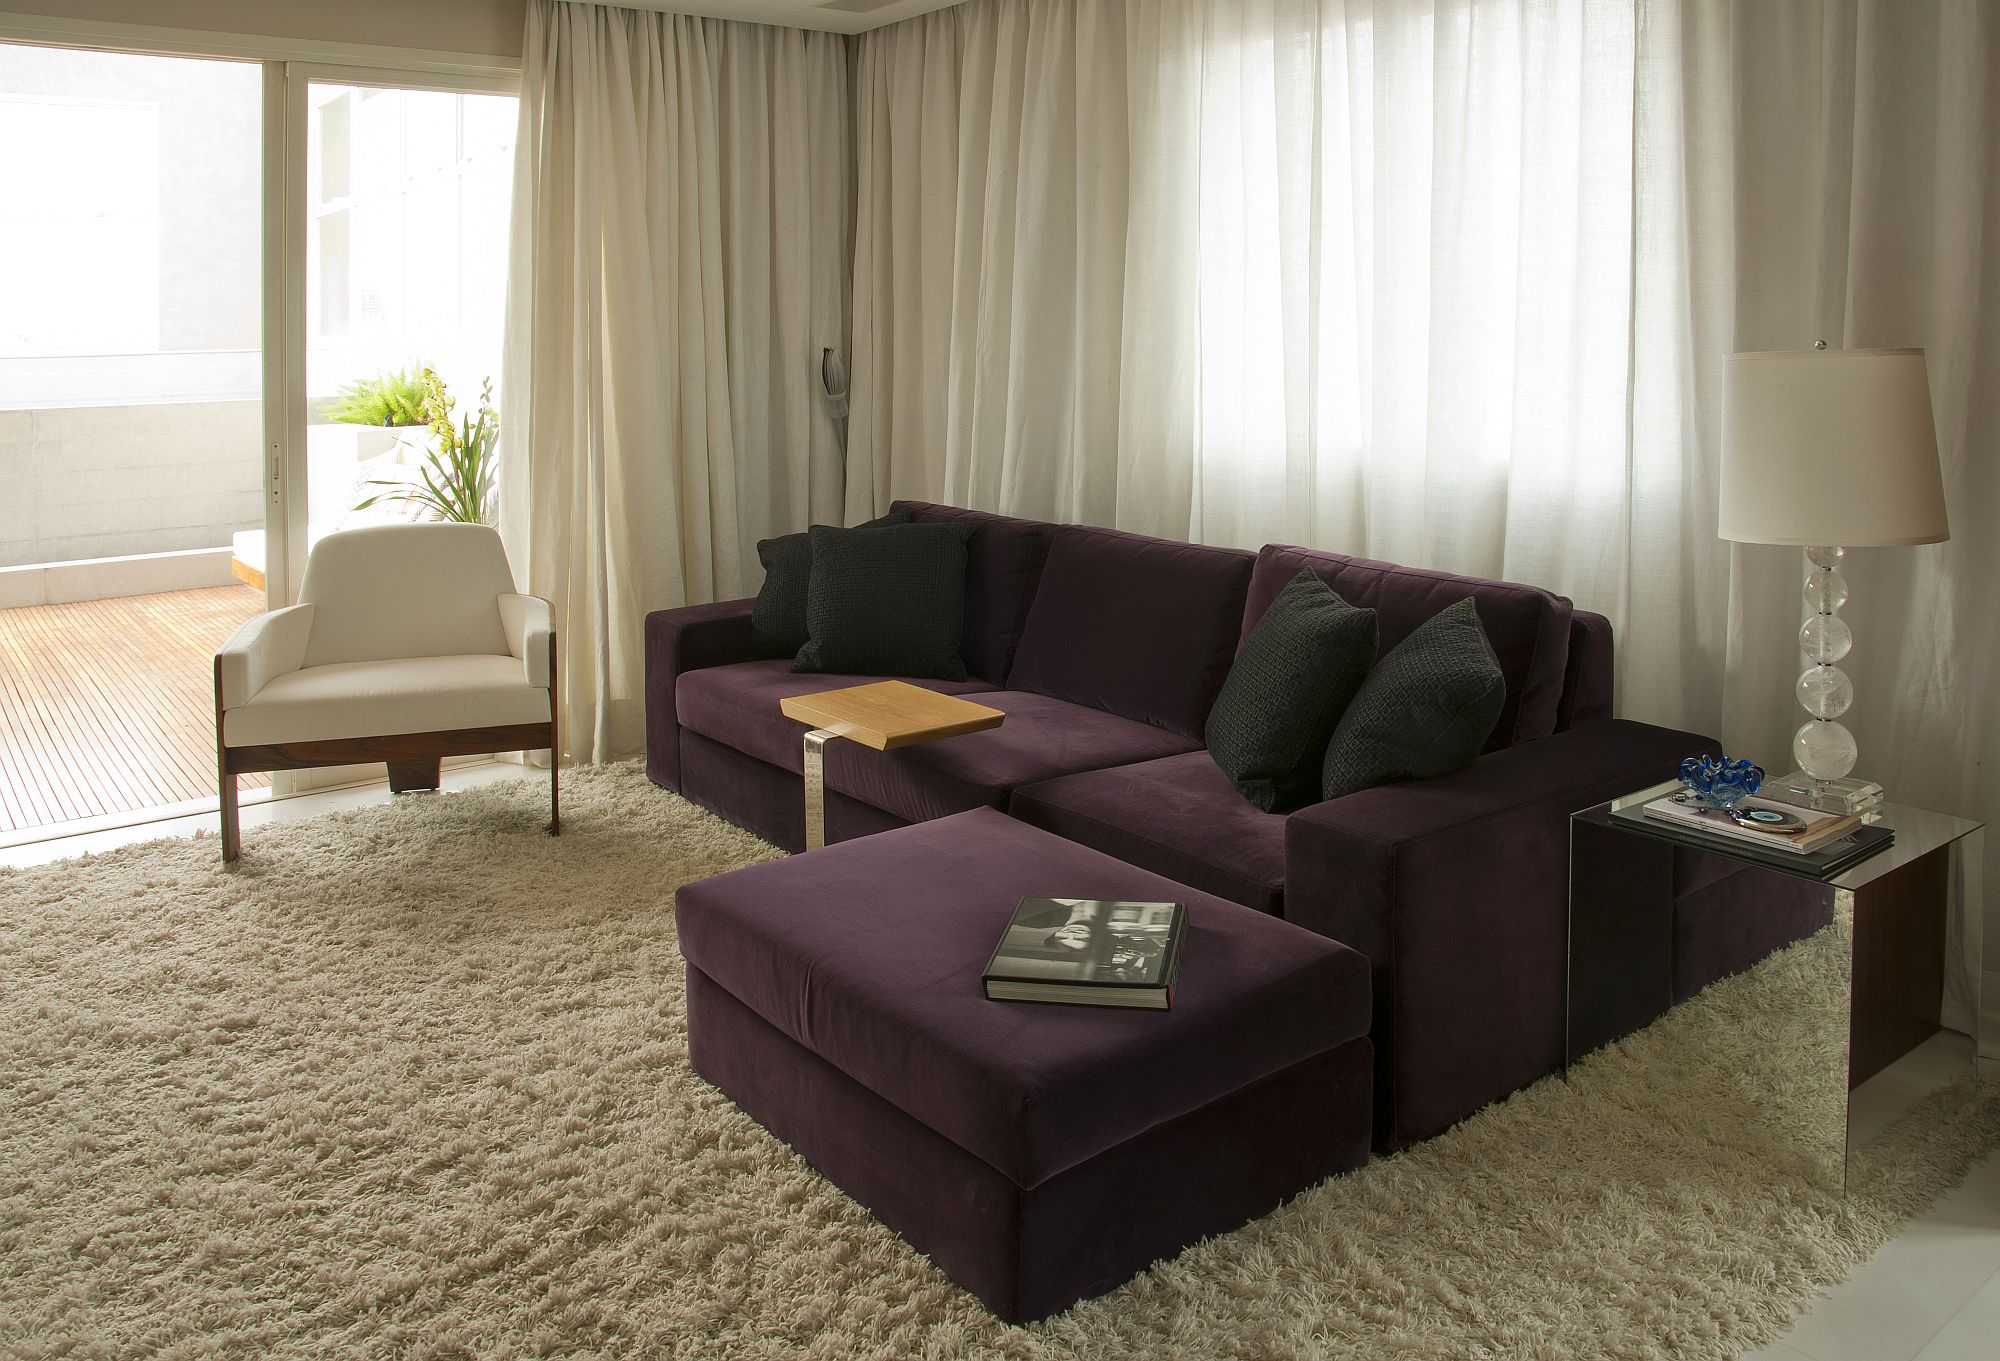 Comfy modern sectional in purple